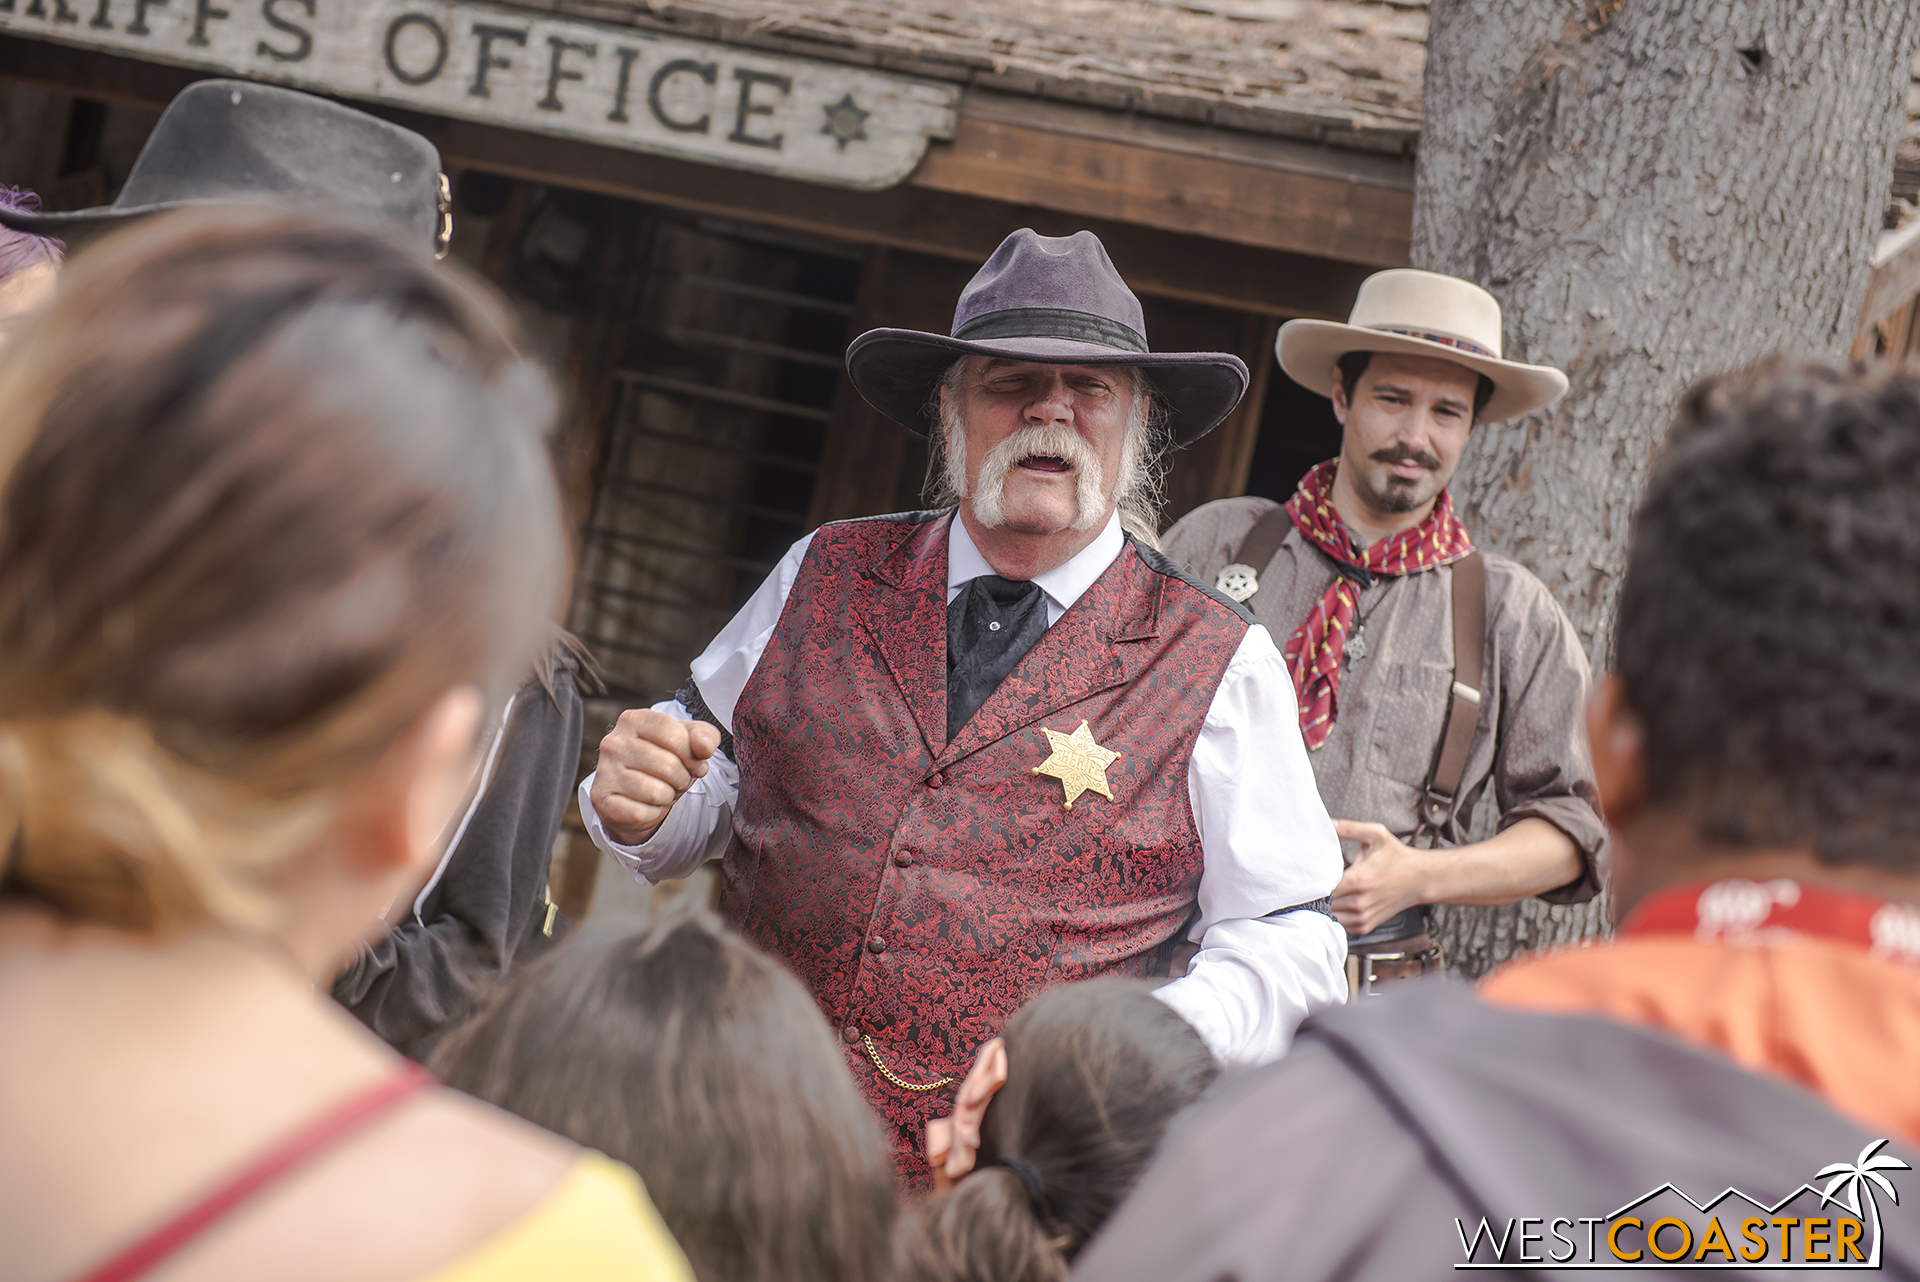  To apprehend the perpetrators, the Sheriff rounds up a posse at 2:30. 